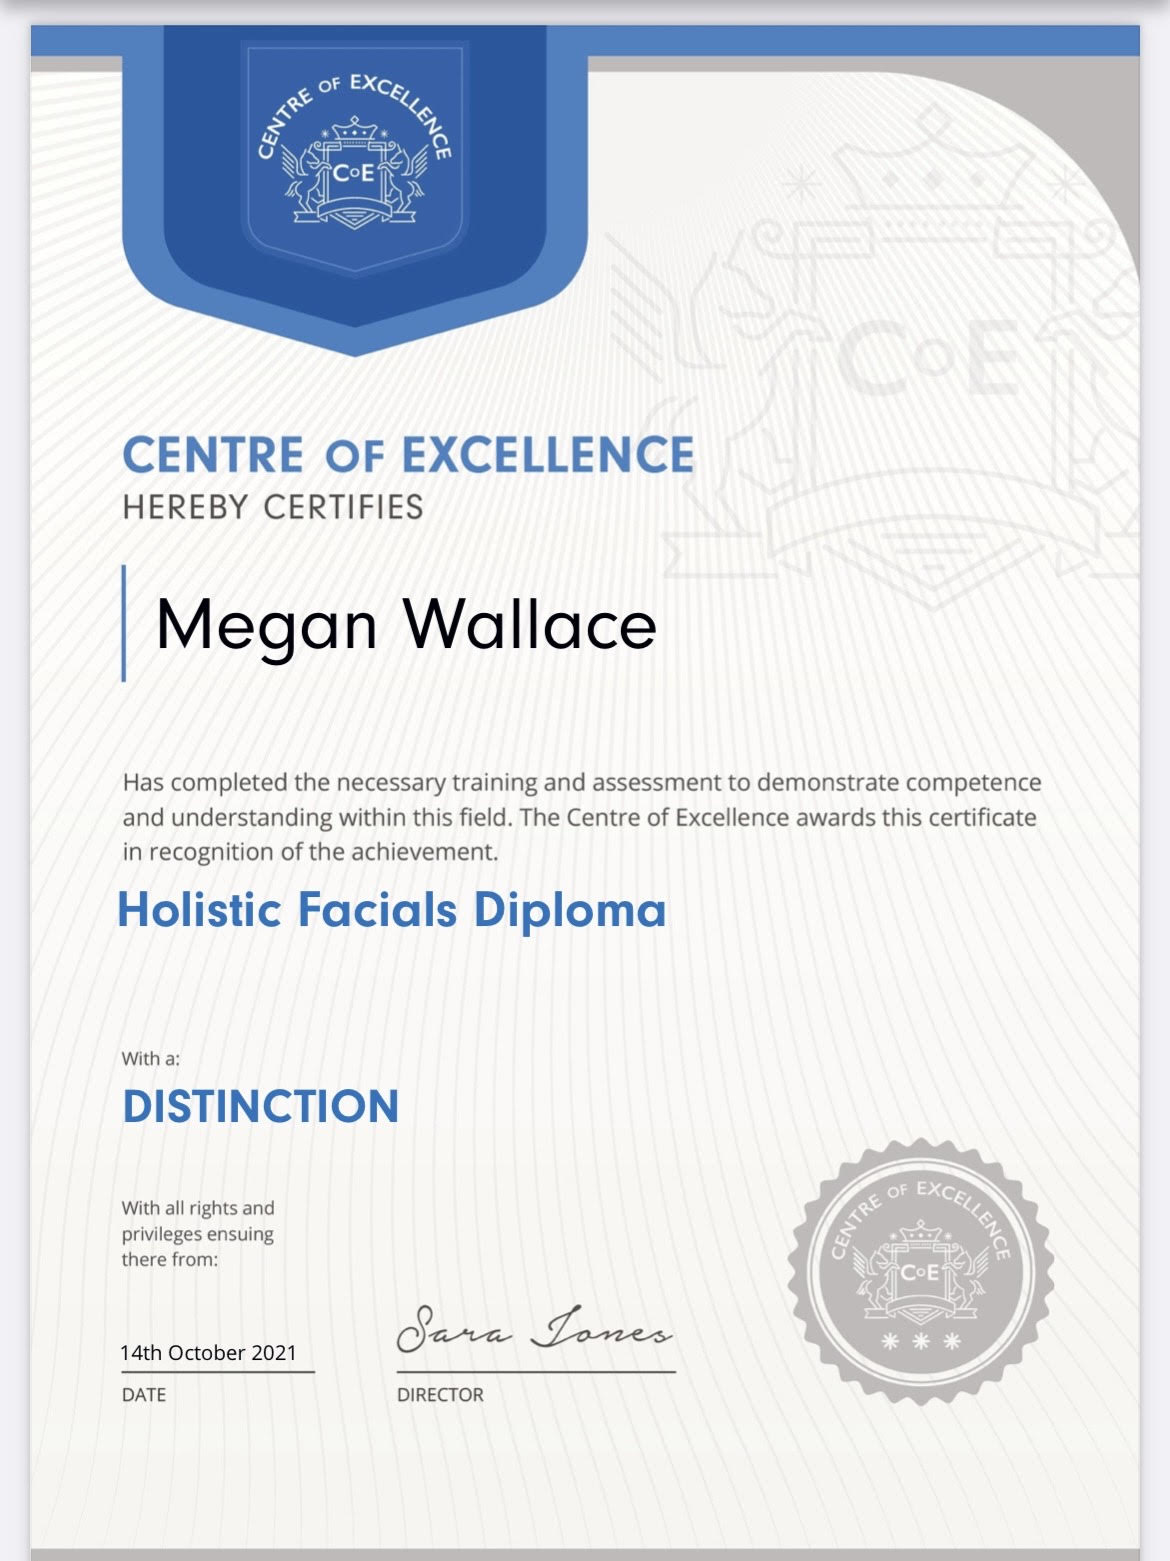 Megan Wallace's Holistic Facials Diploma from the Centre of Excellence